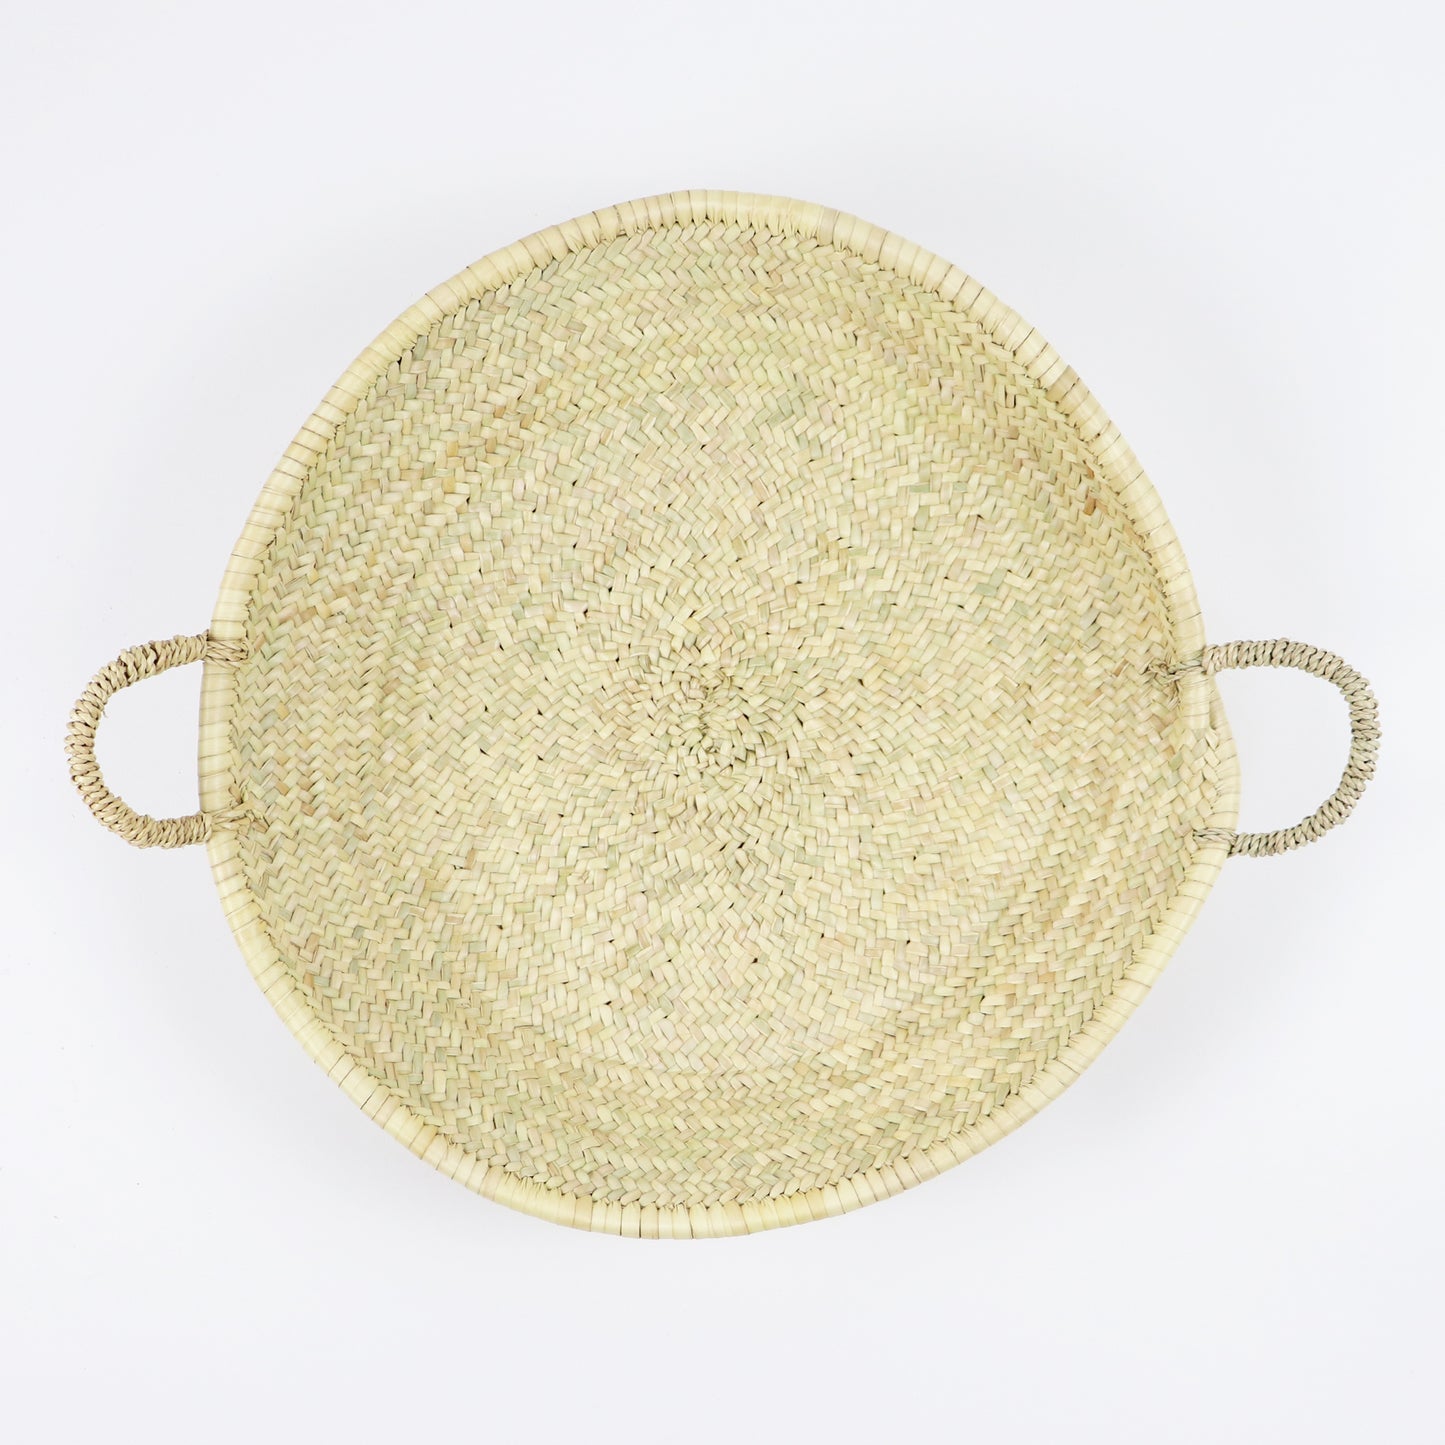 Moroccan Woven Plate